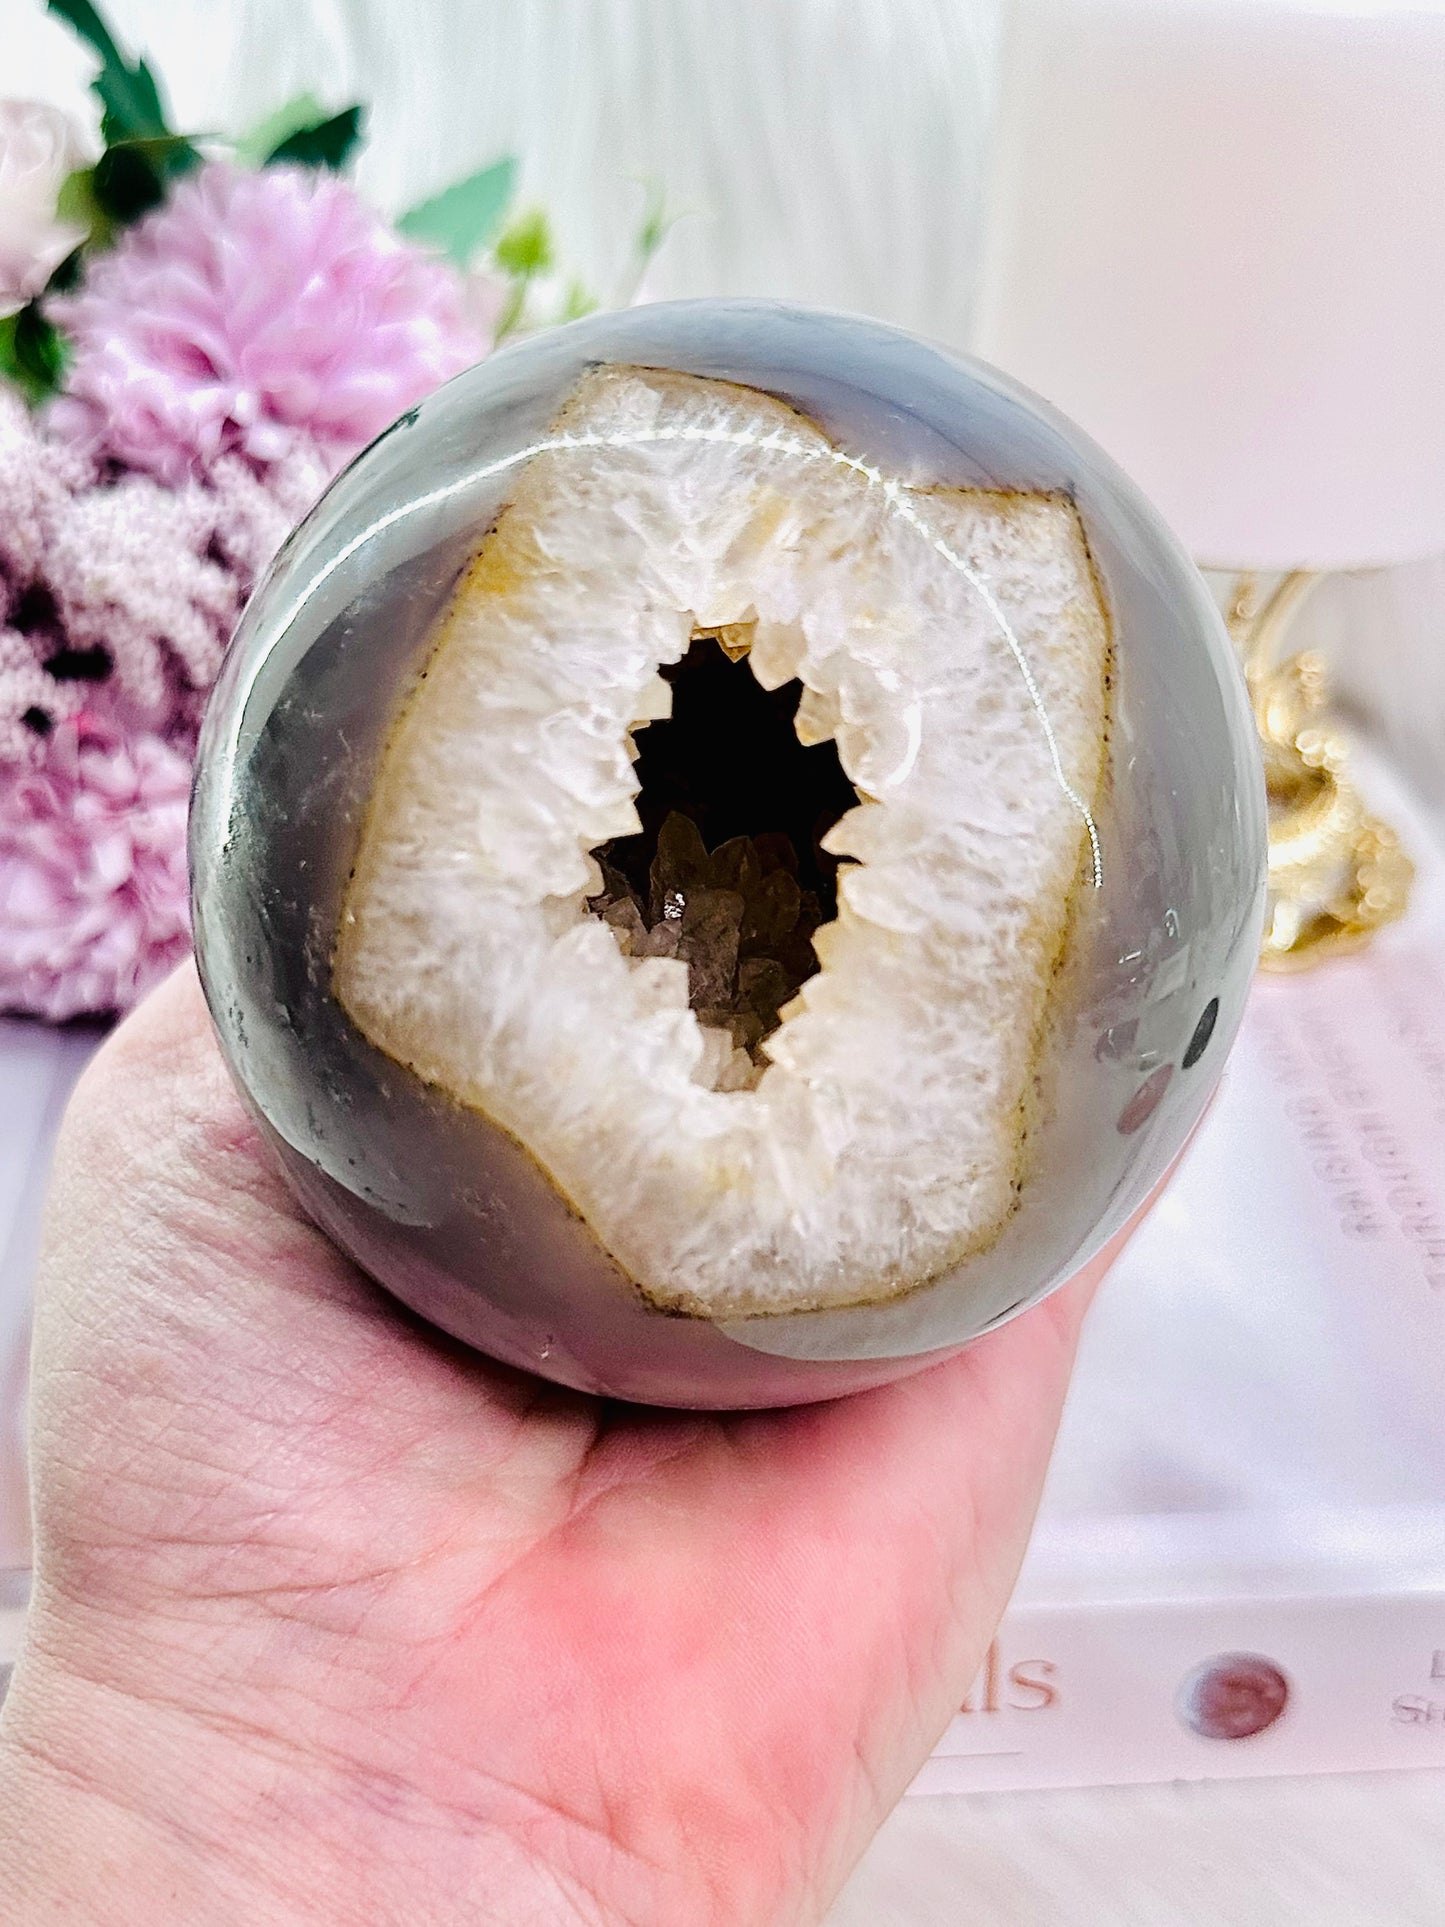 Magical & Incredible Large 821gram Perfect Druzy Agate Sphere On Stand From Brazil (Glass stand in pic is display only)